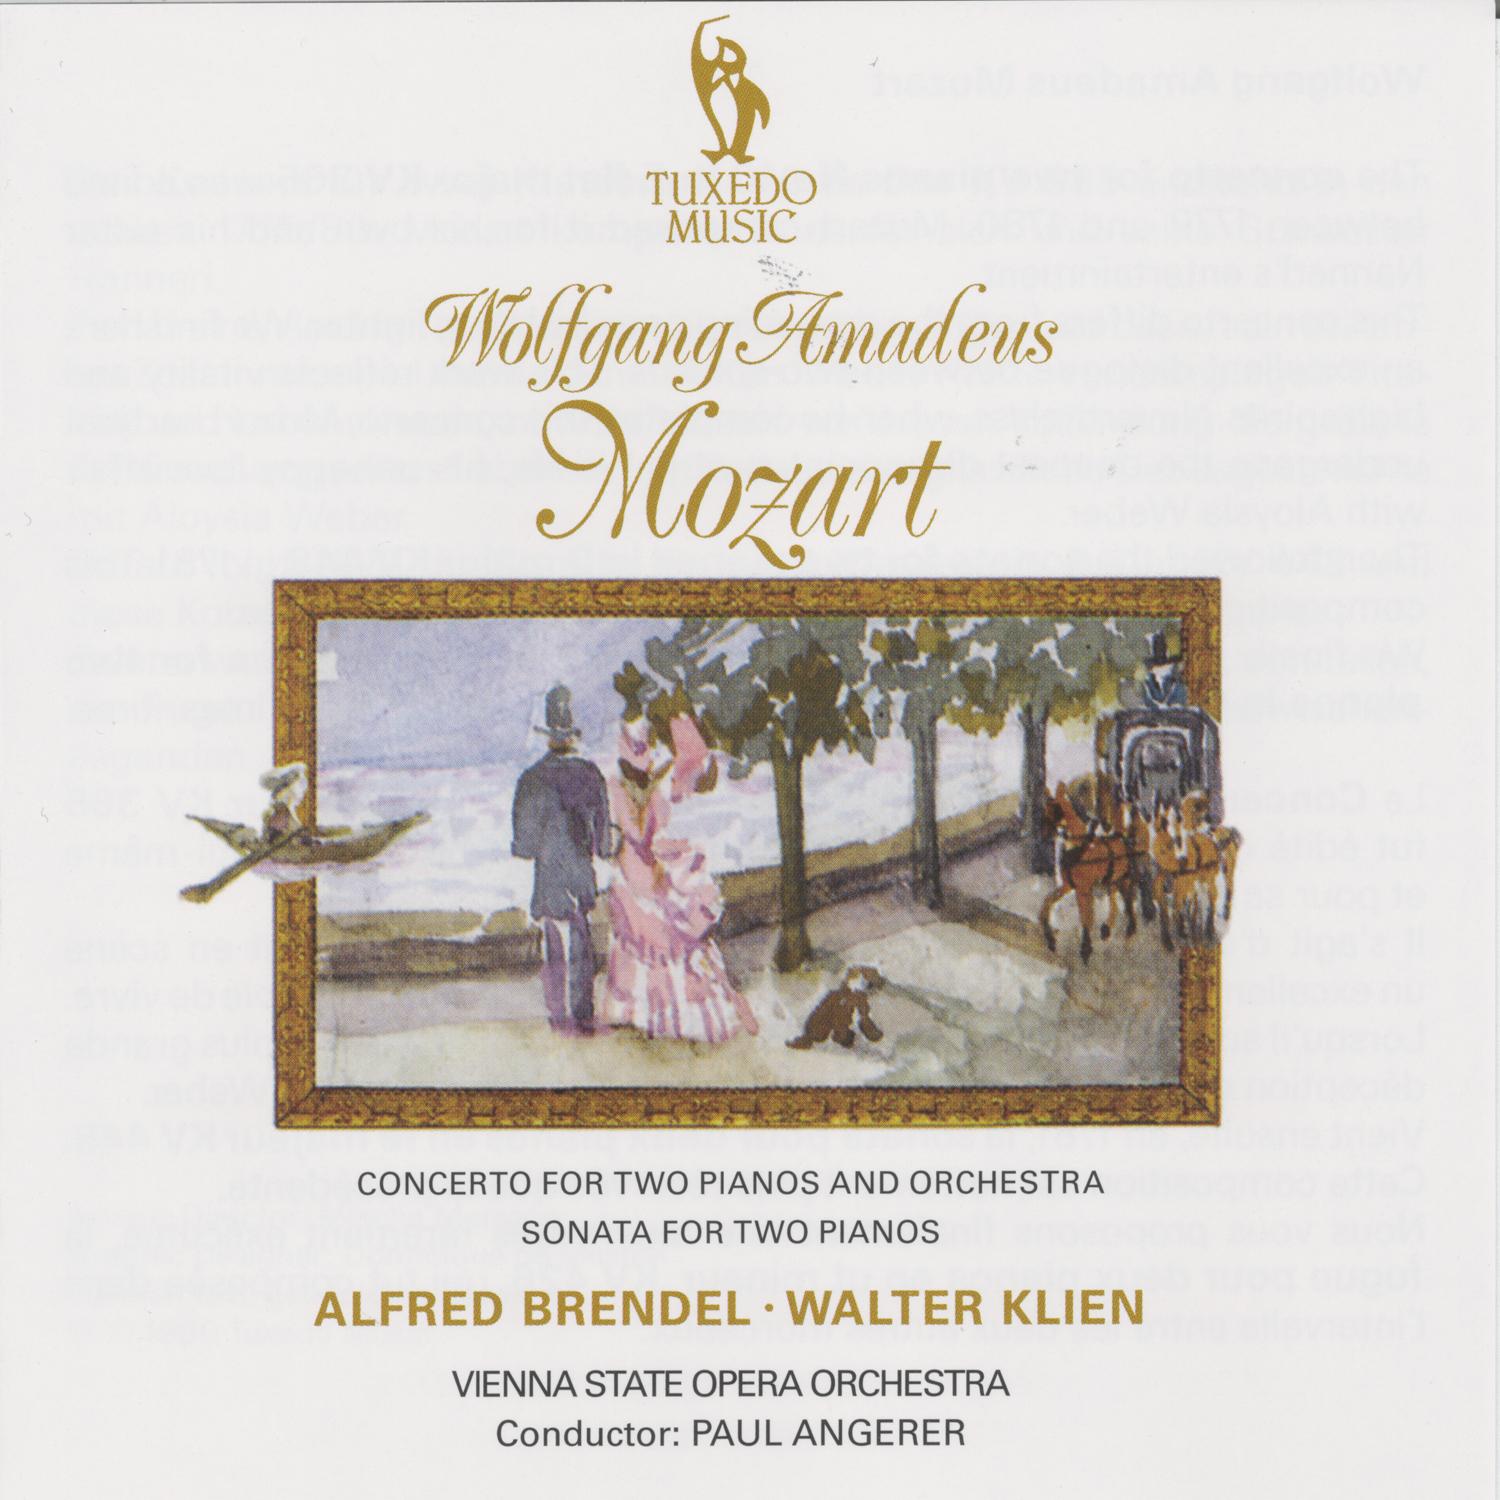 Mozart: Concerto for Two Pianos and Orchestra, K. 365 & Sonata for Two Pianos, K. 448